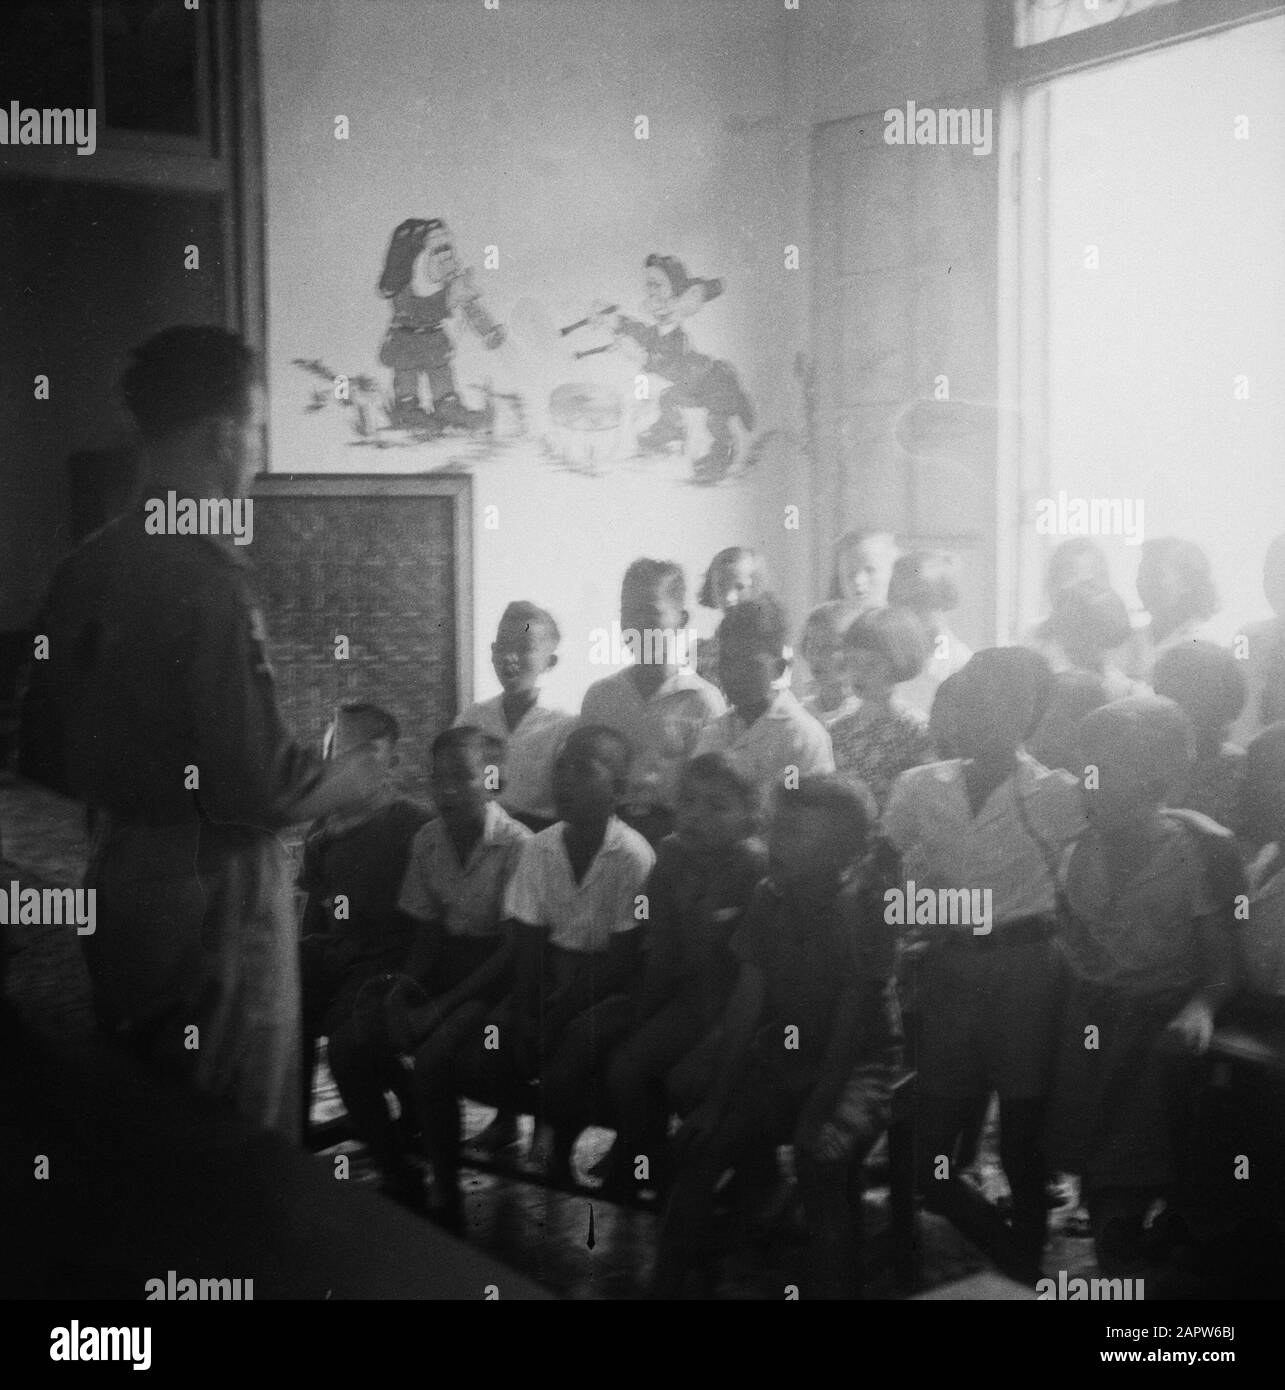 Kindertehuis West-Java in Buitenzorg  Children's Choir with a military conductor Date: April 8, 1948 Location: Indonesia, Dutch East Indies Stock Photo